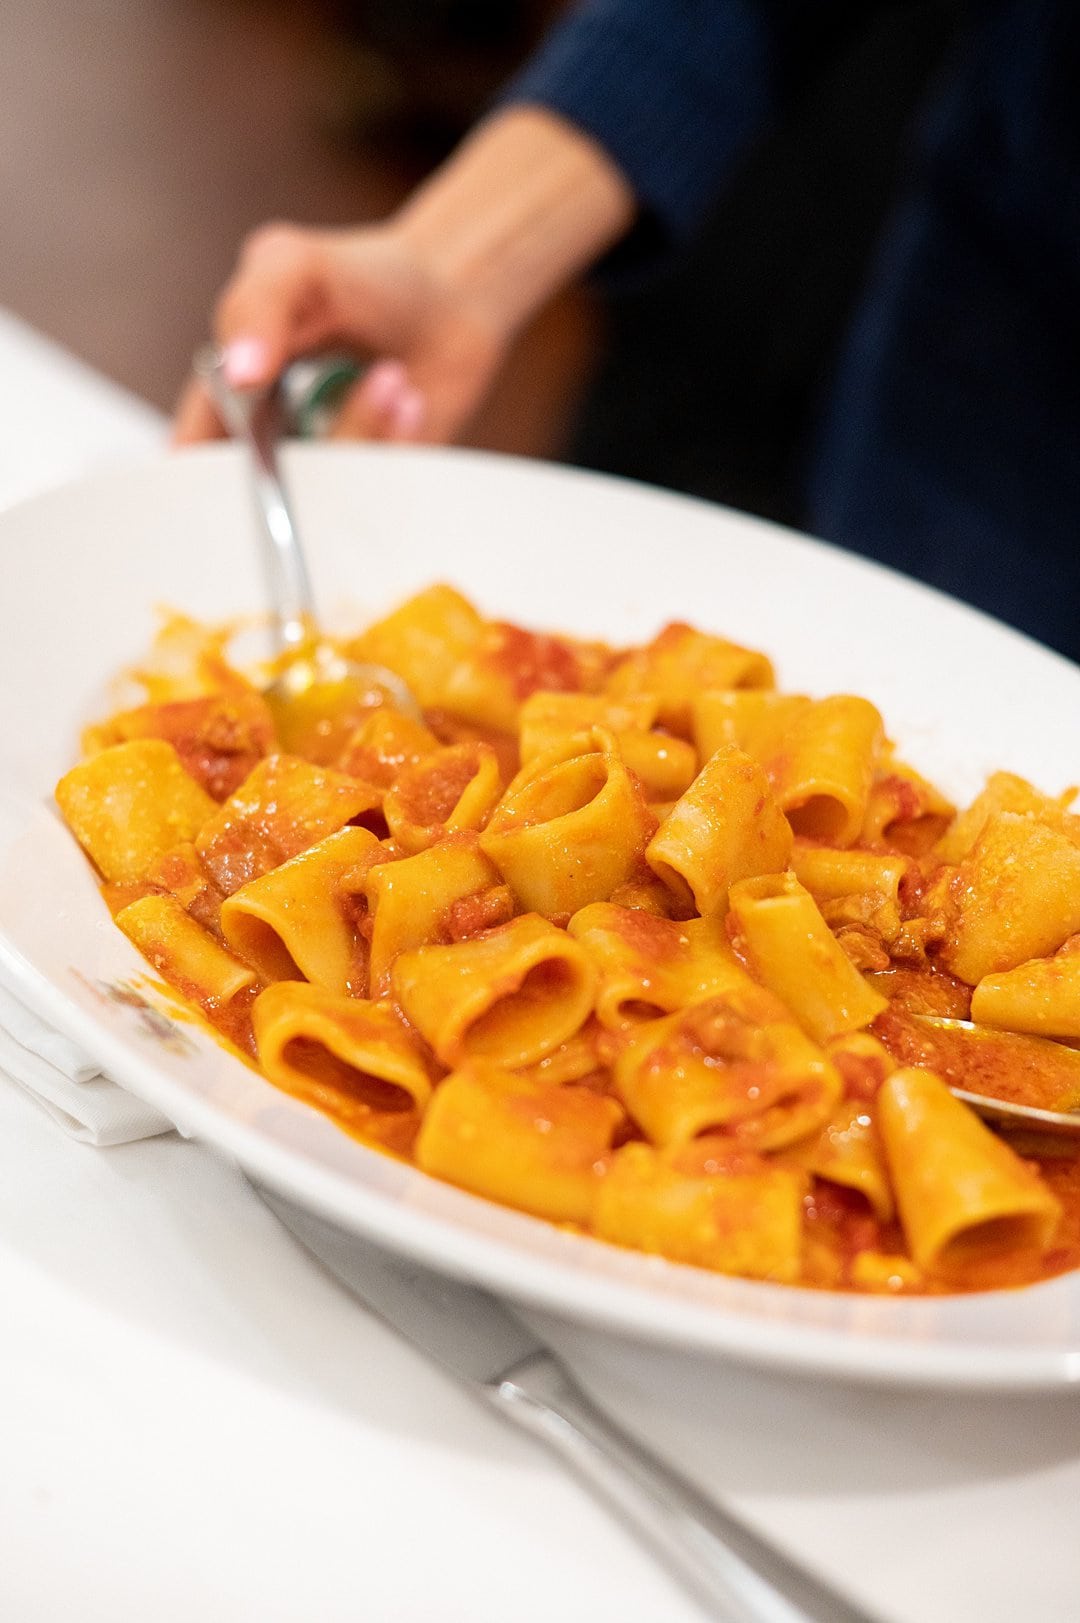 Plate of Pasta Amatriciana, a dish in Rome with a red sauce.